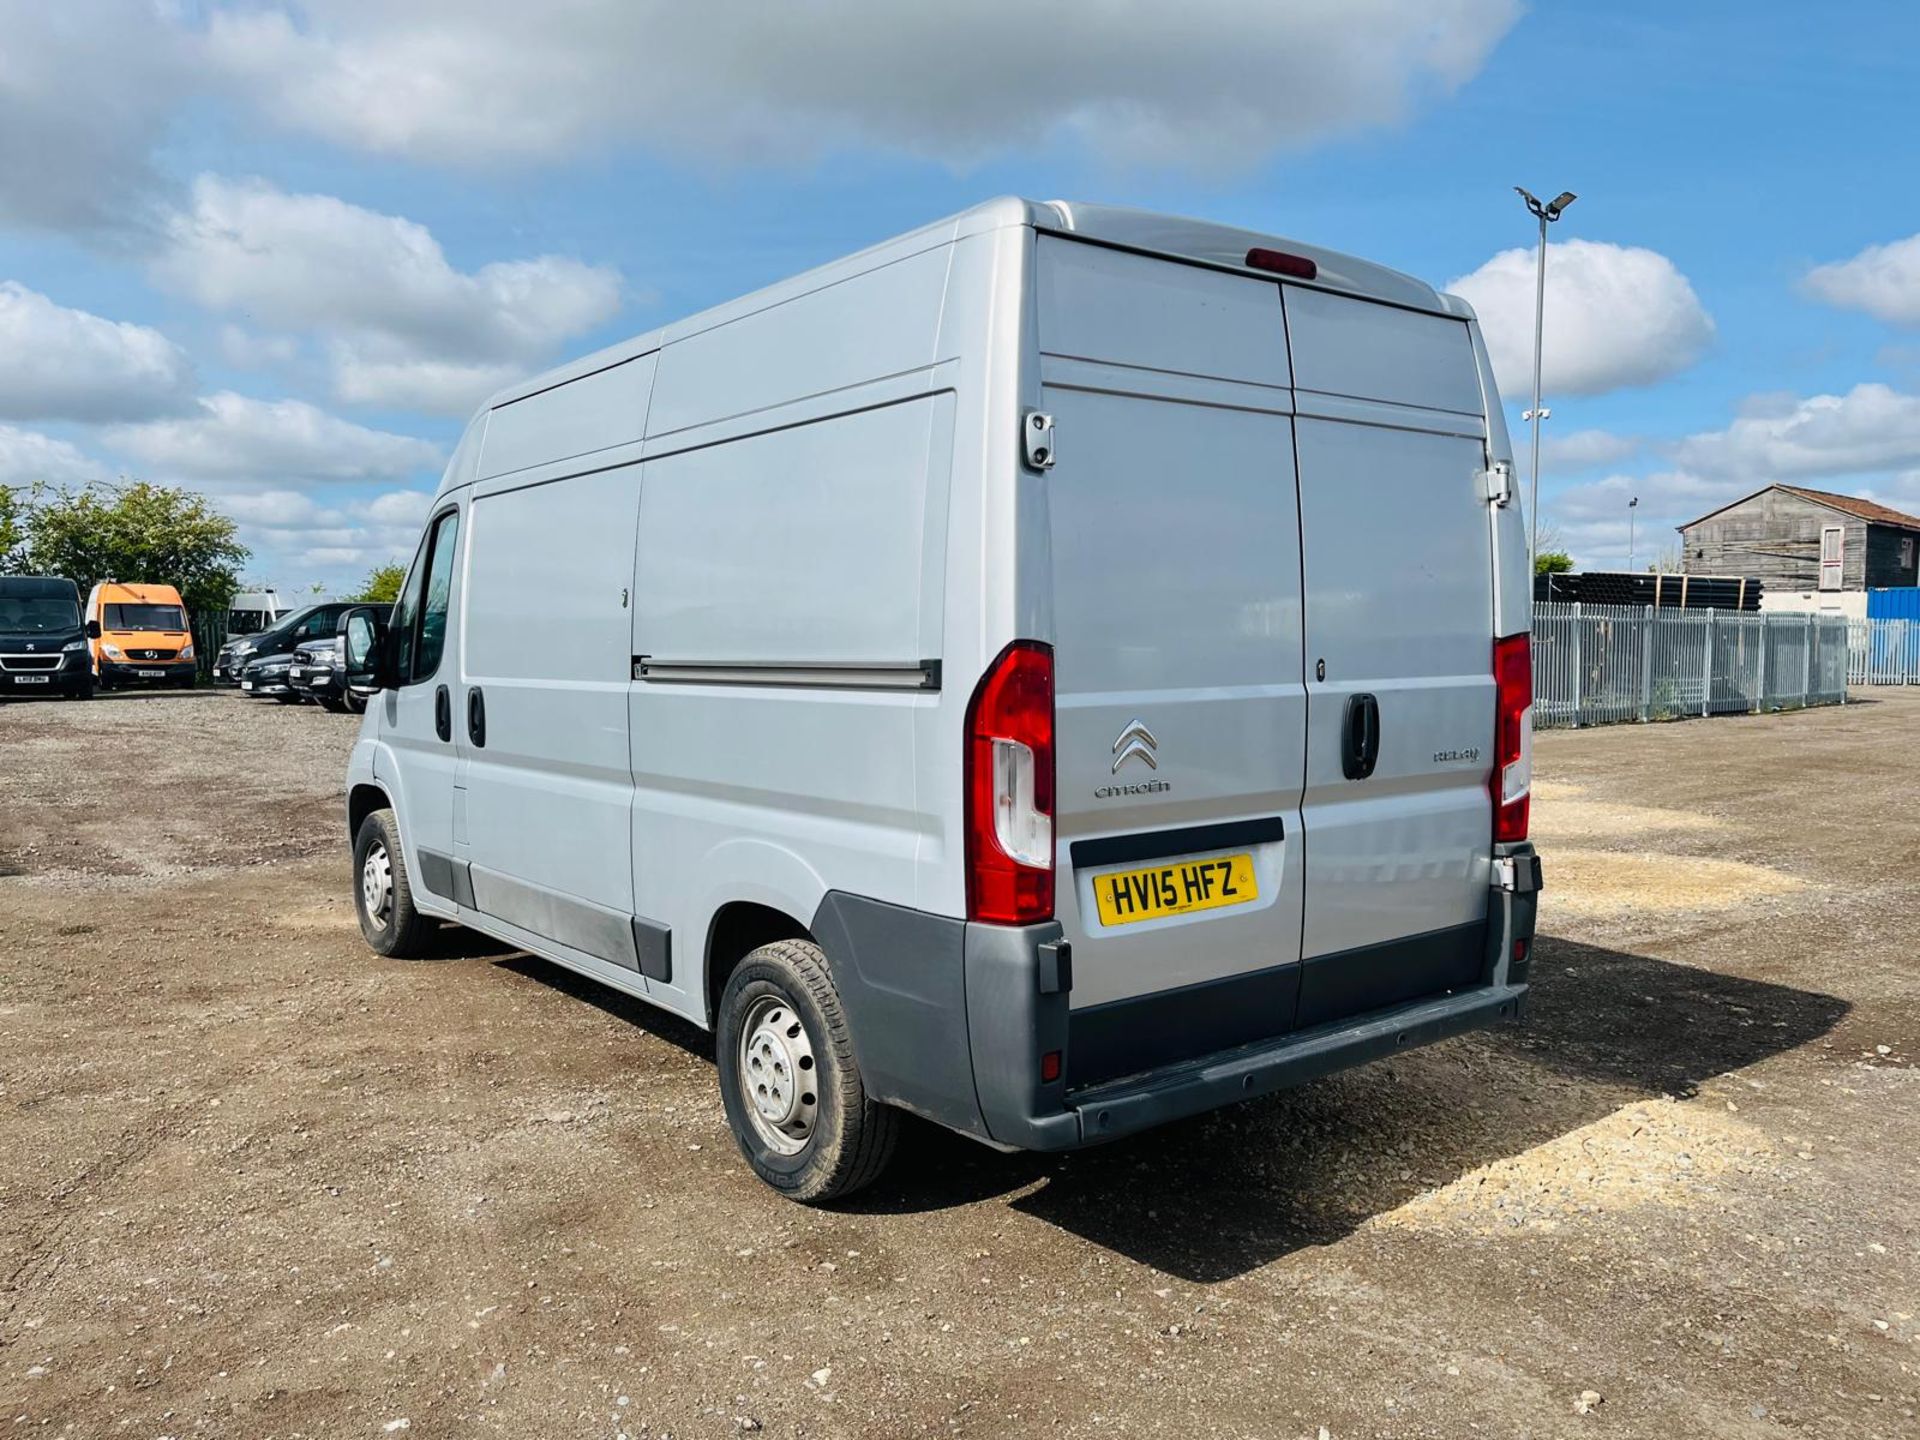 ** ON SALE ** Citroen Relay 2.2 HDI 130 Enterprise L2 H2 2.2 2015 '15 Reg' -A/C- Plylined- Bluetooth - Image 8 of 29